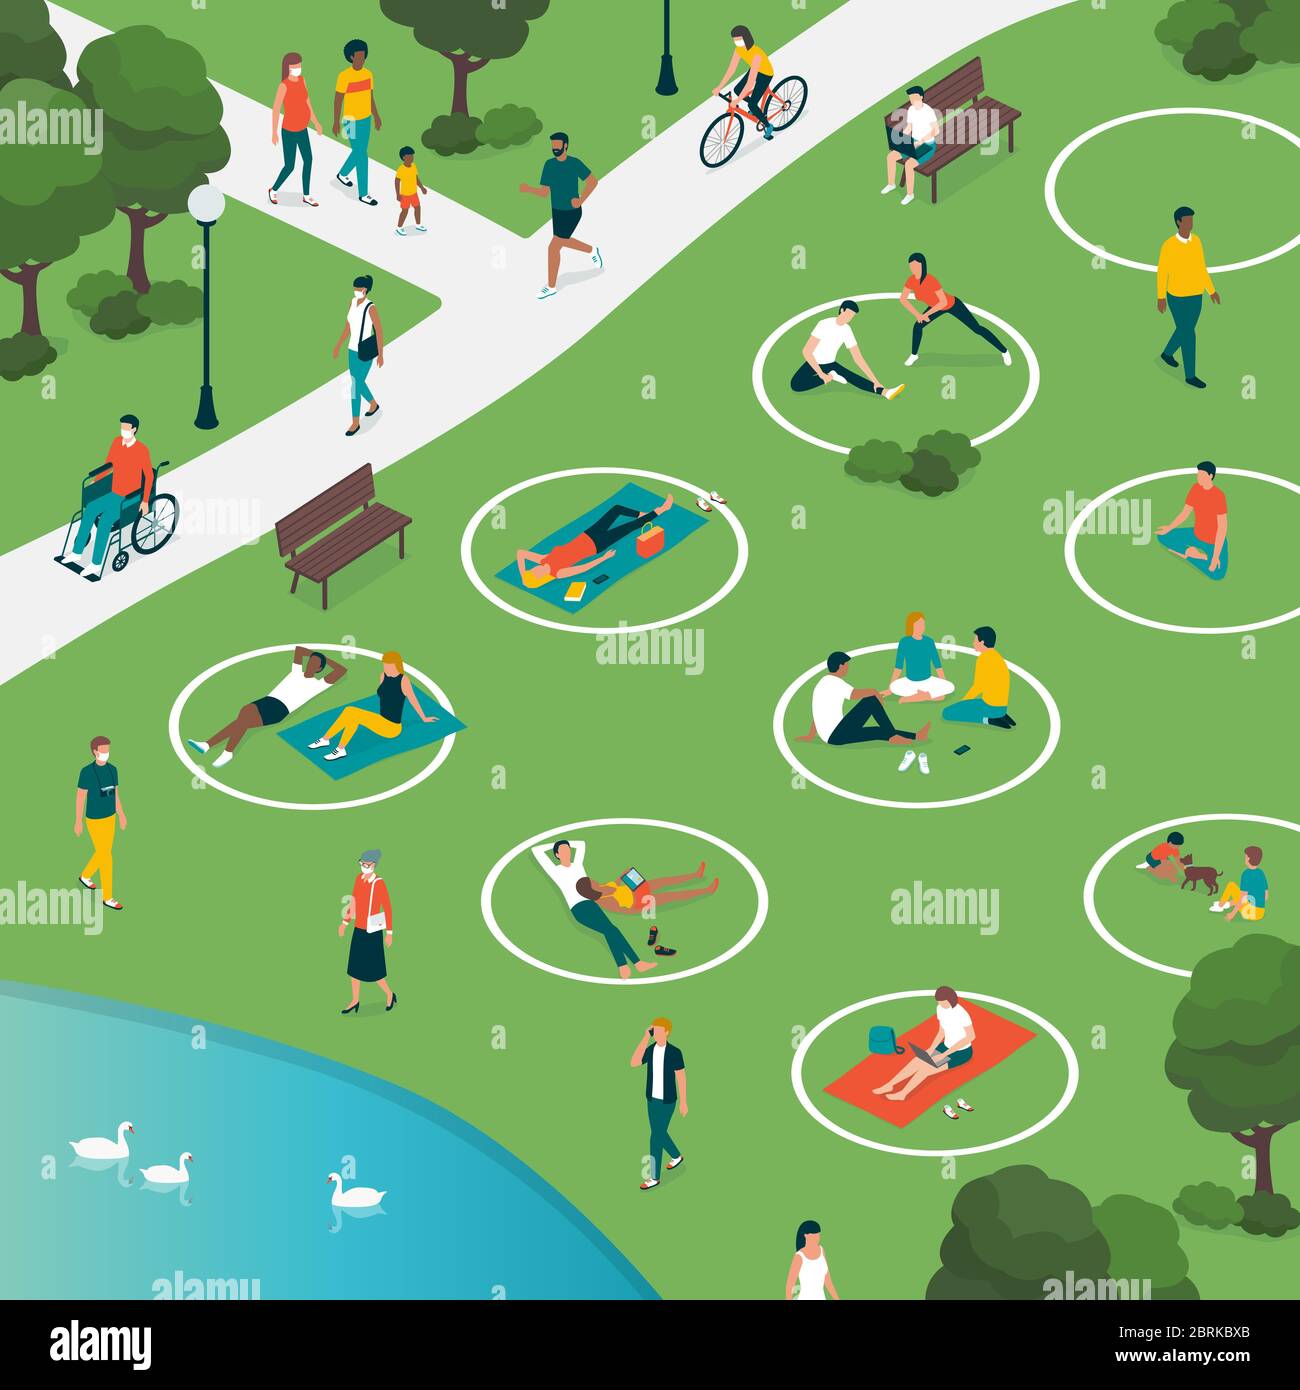 Social distancing circles in the city park and people relaxing safely outdoors, coronavirus covid-19 prevention Stock Vector